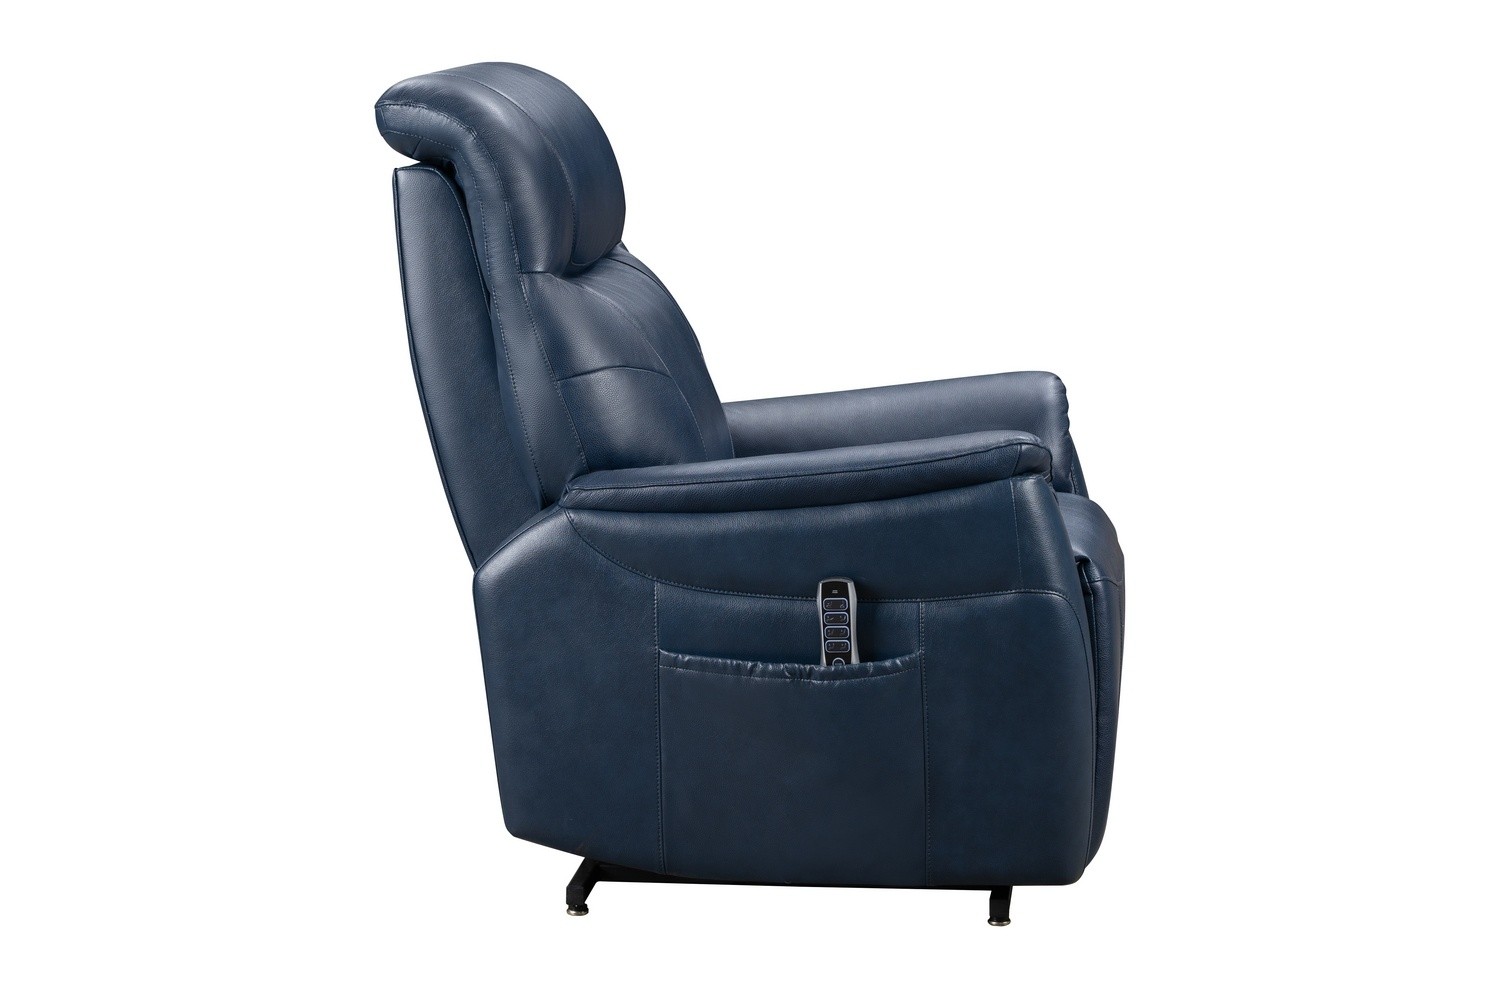 Barcalounger Leighton Lift Chair Recliner Chair with Power Head Rest, Power Lumbar and Lay Flat Mechanism - Marco Navy Blue/Leather Match